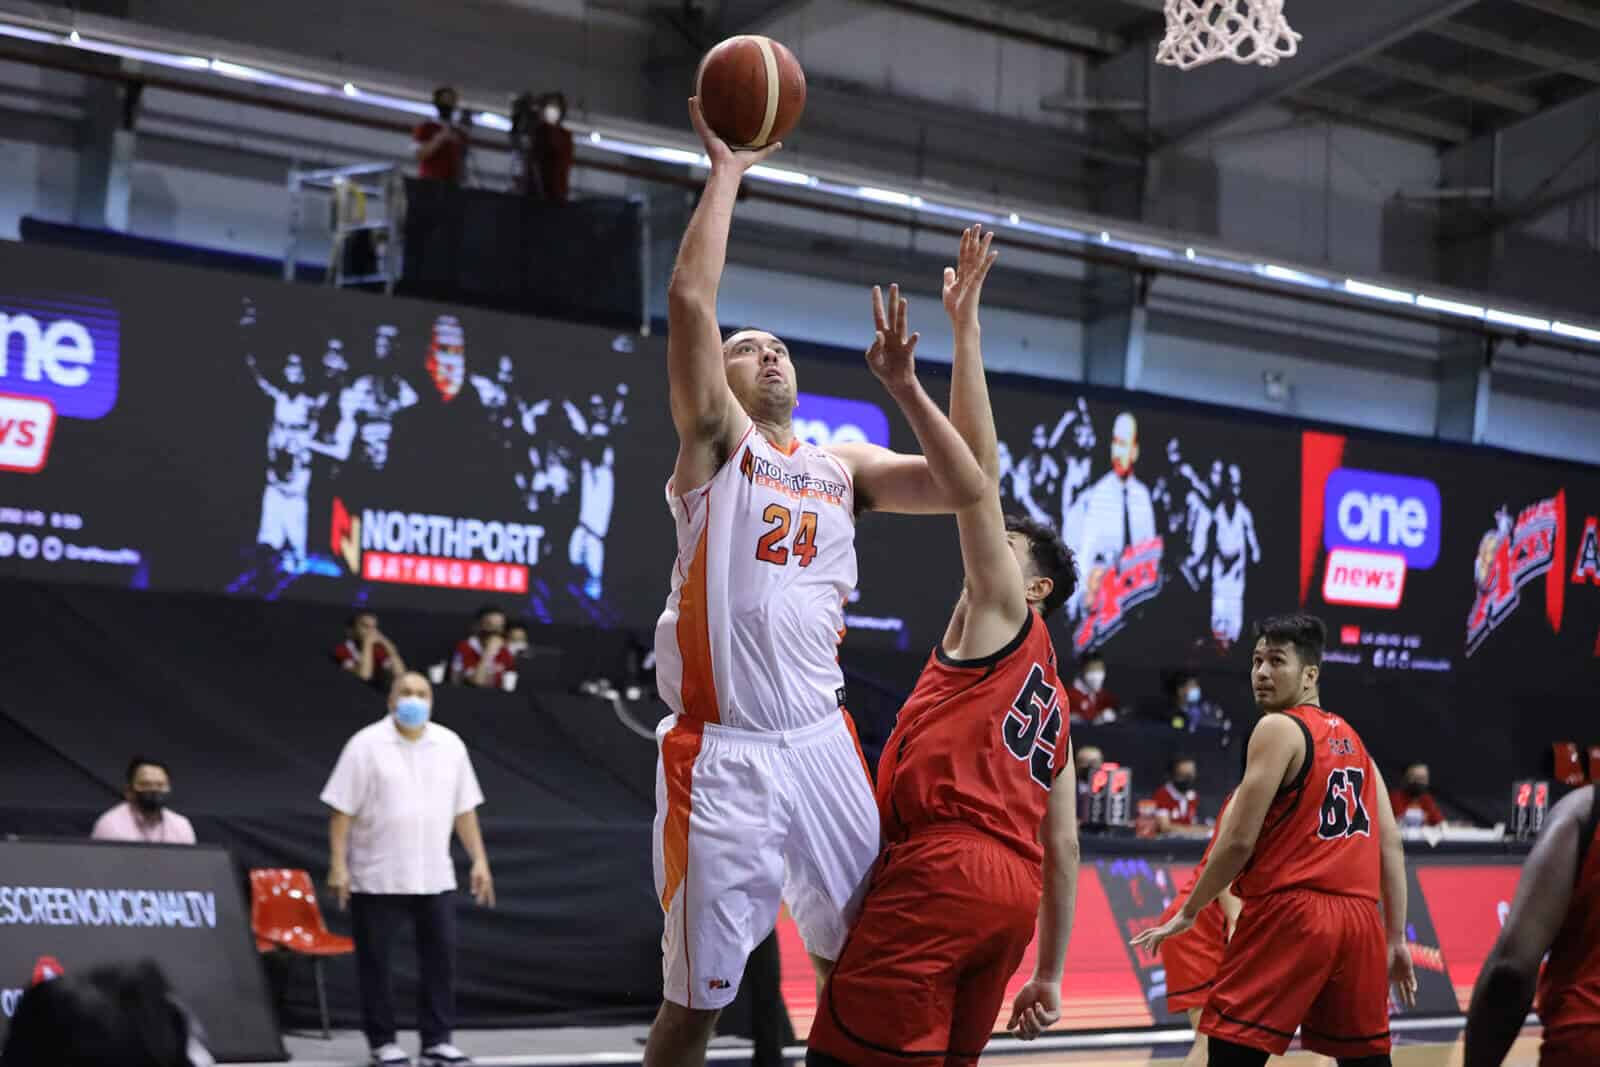 Greg Slaughter, former Northport big man, attempts to block a shot in a game.